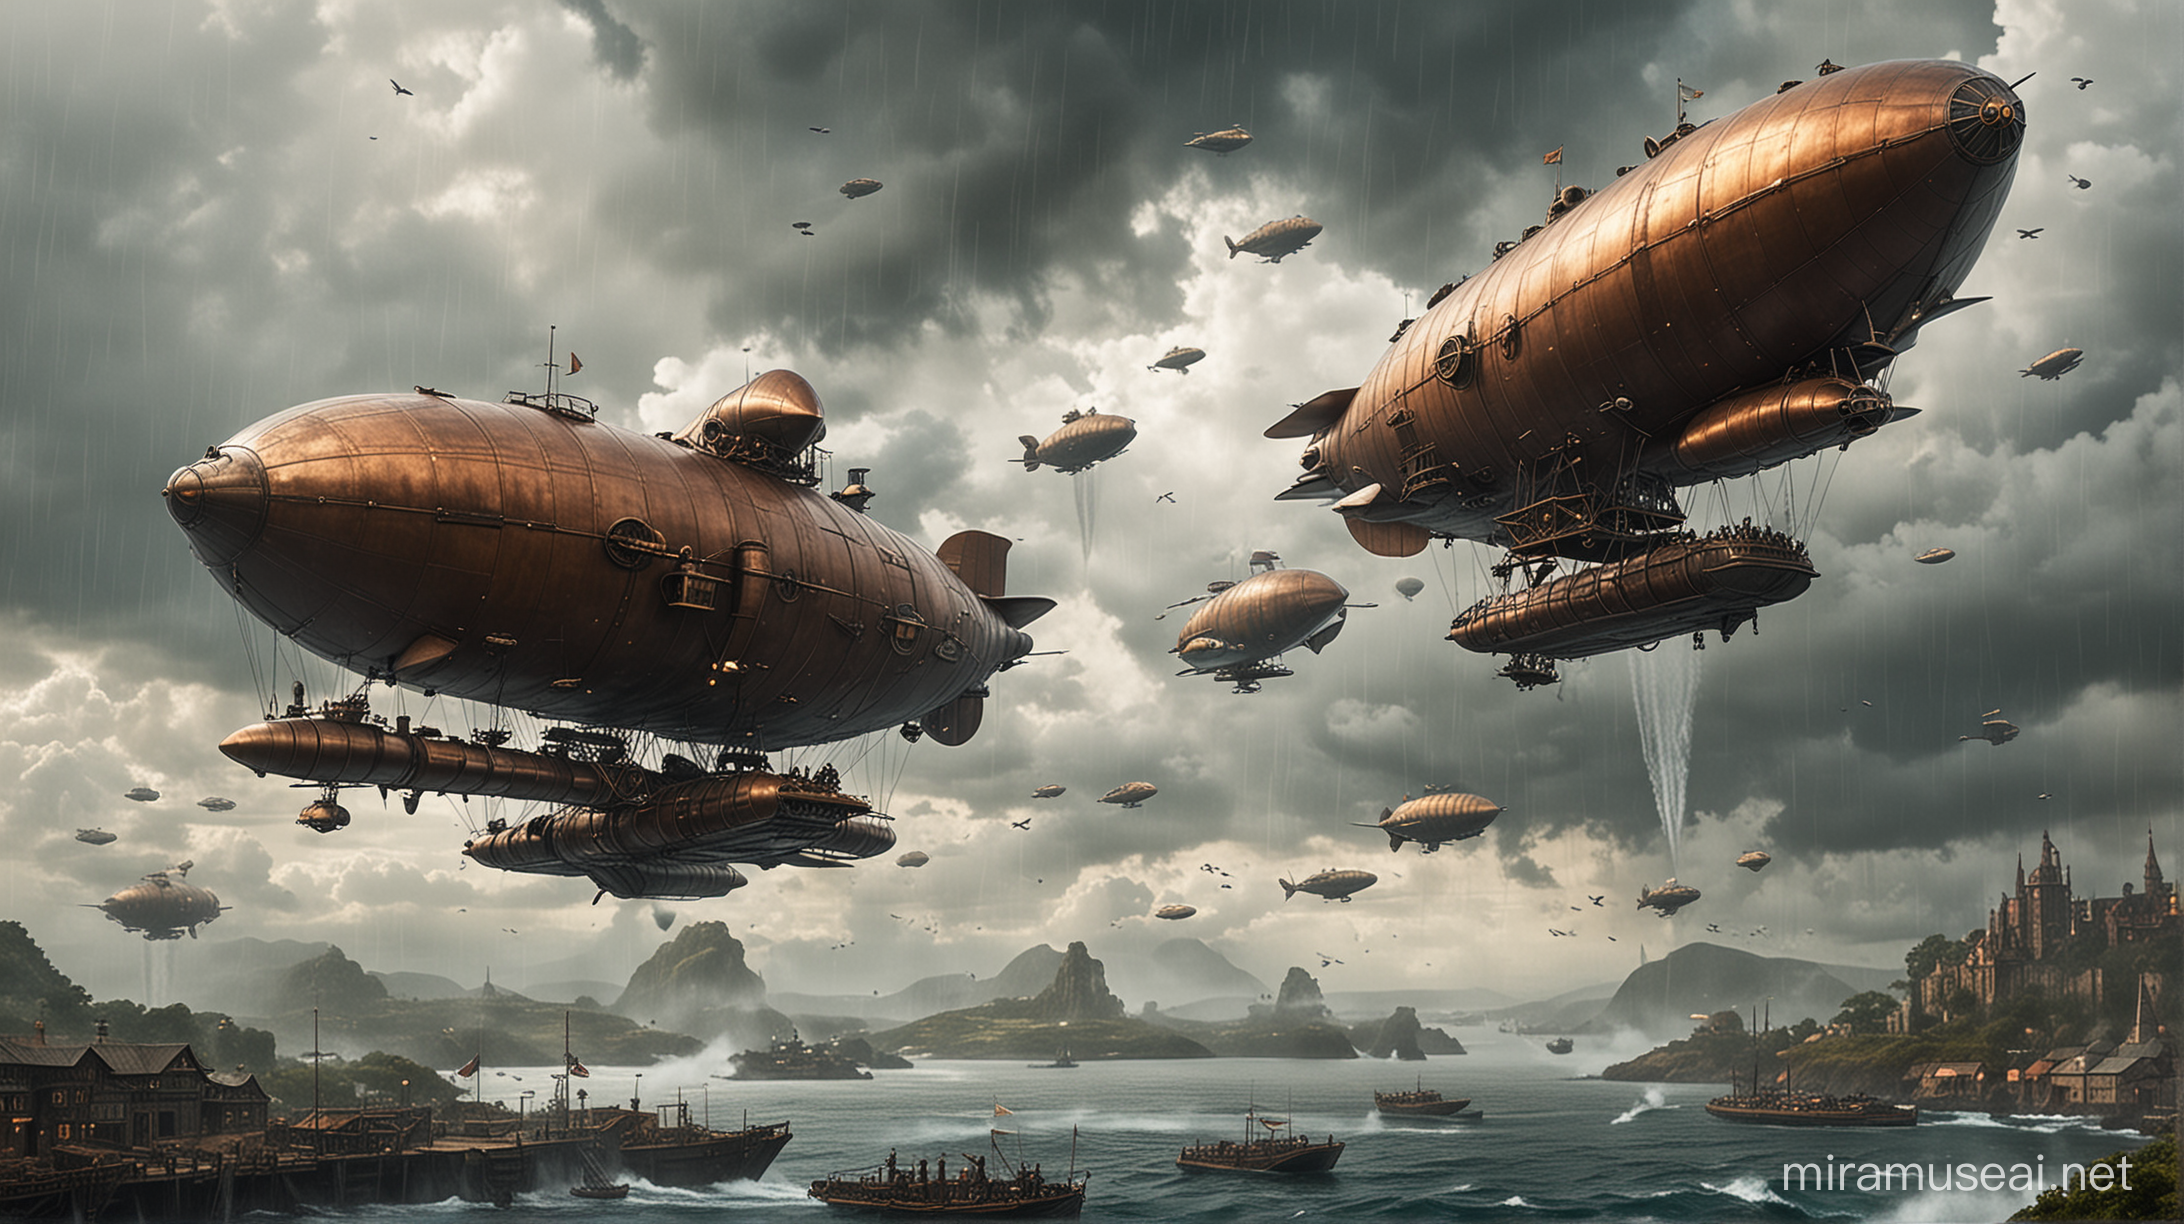 the fleet of steampunk battle Zeppelins flies over the group of islands with steampunk towns. The Zeppelins are made of copper, brass and glass. the Zeppelins have large guns. Steam and smoke. Rainy and cloudy.